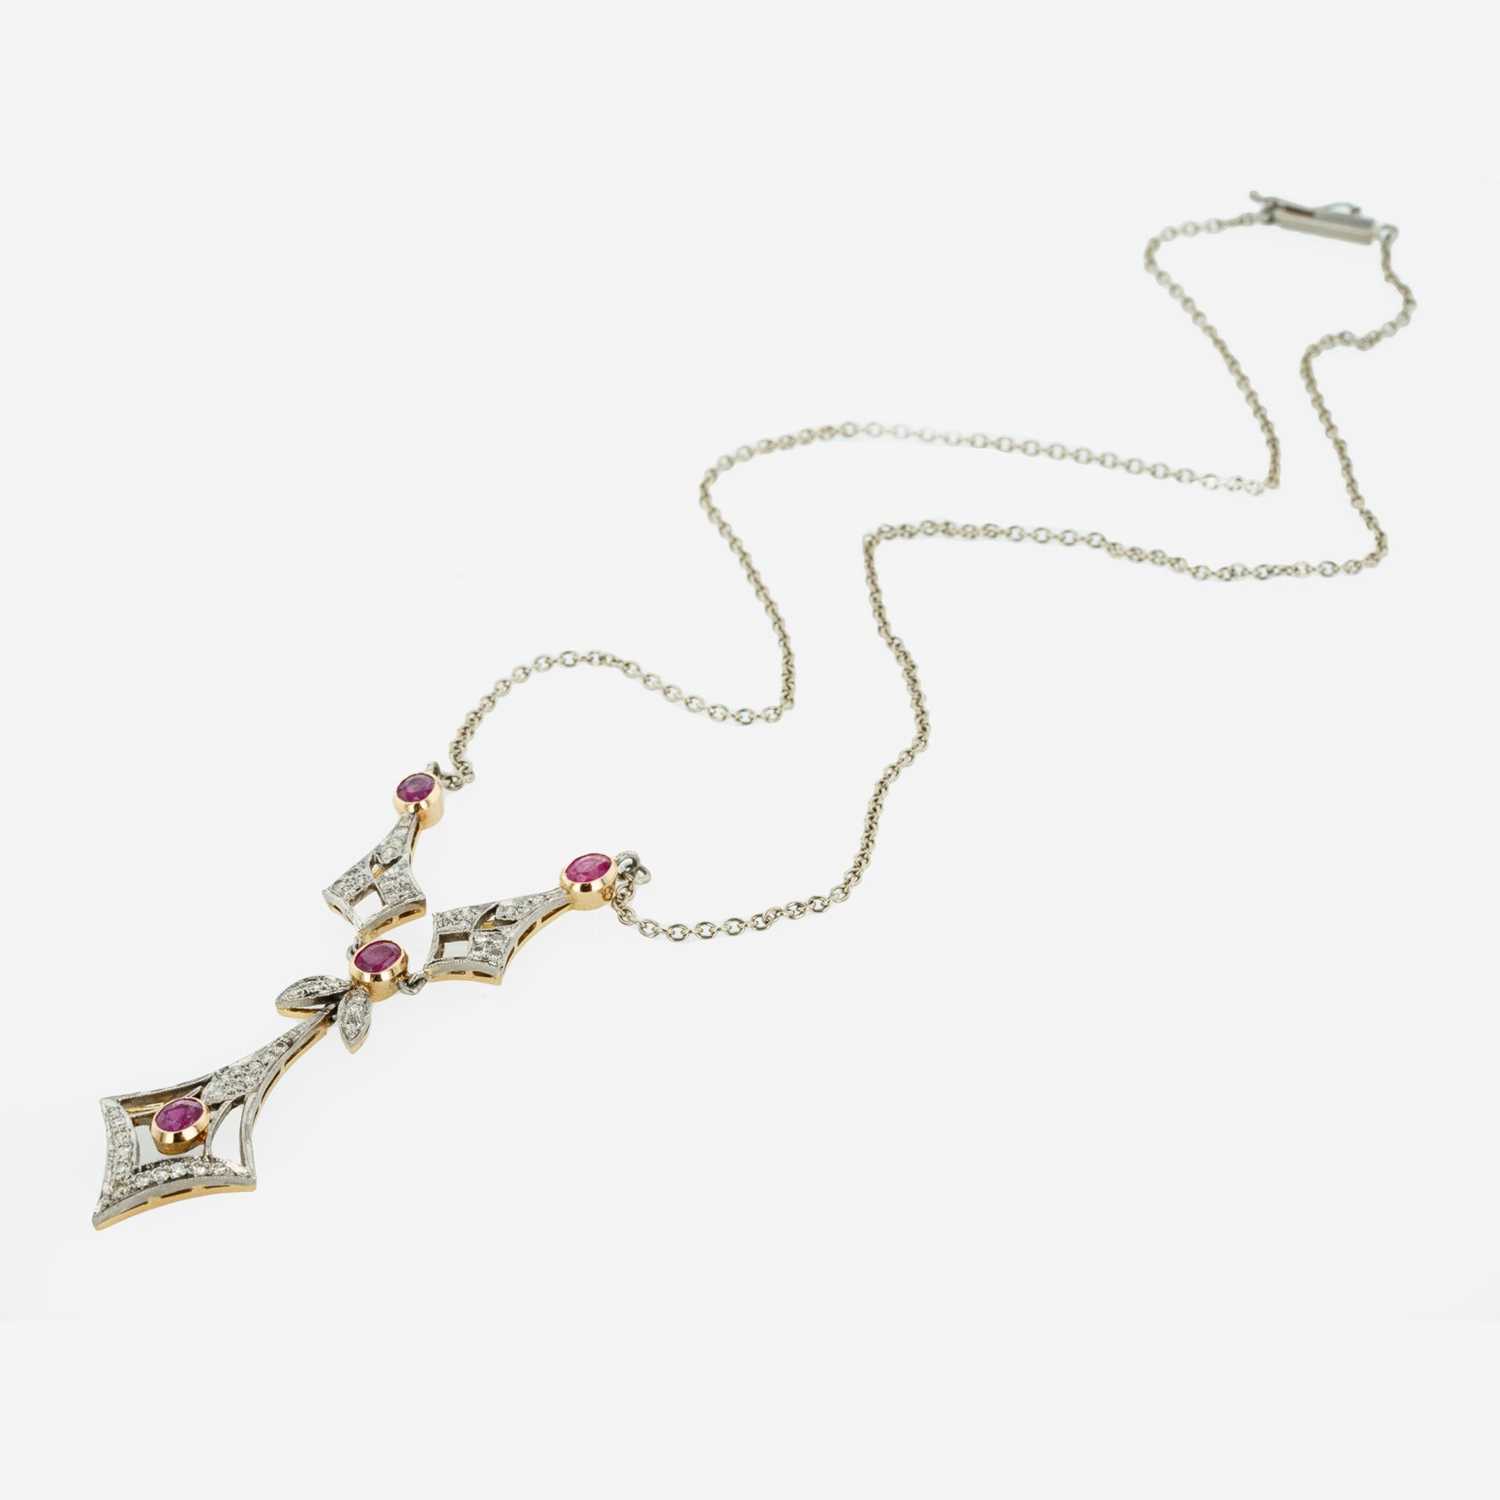 Lot 214 - A Ruby, Diamond, and 18K Gold Necklace